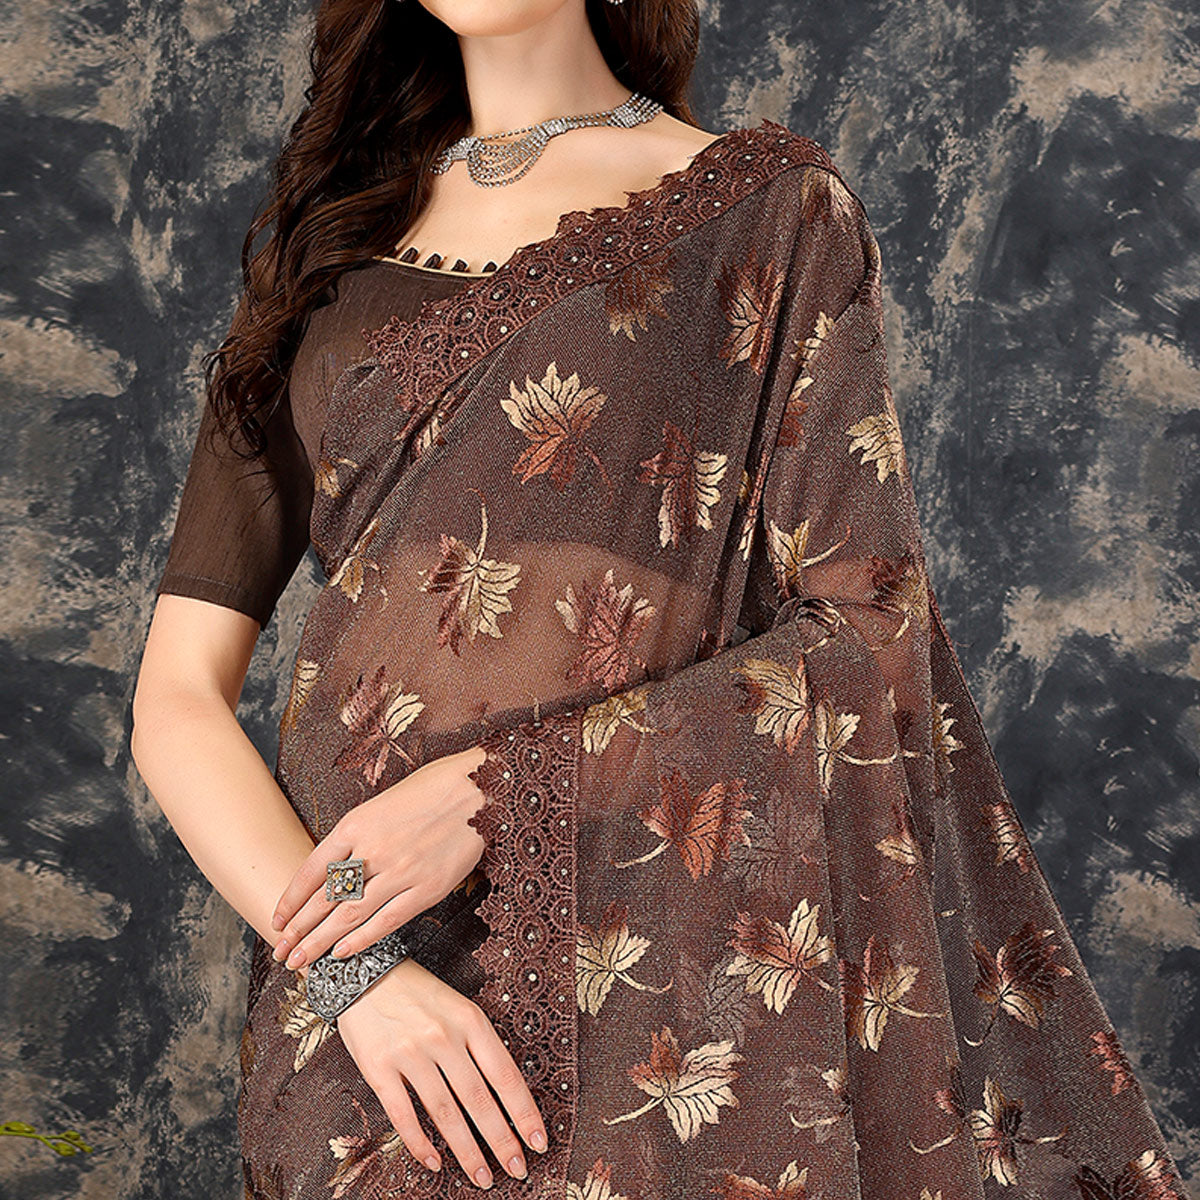 Brown Foil Printed Lycra Saree With Embroidered Lace Border